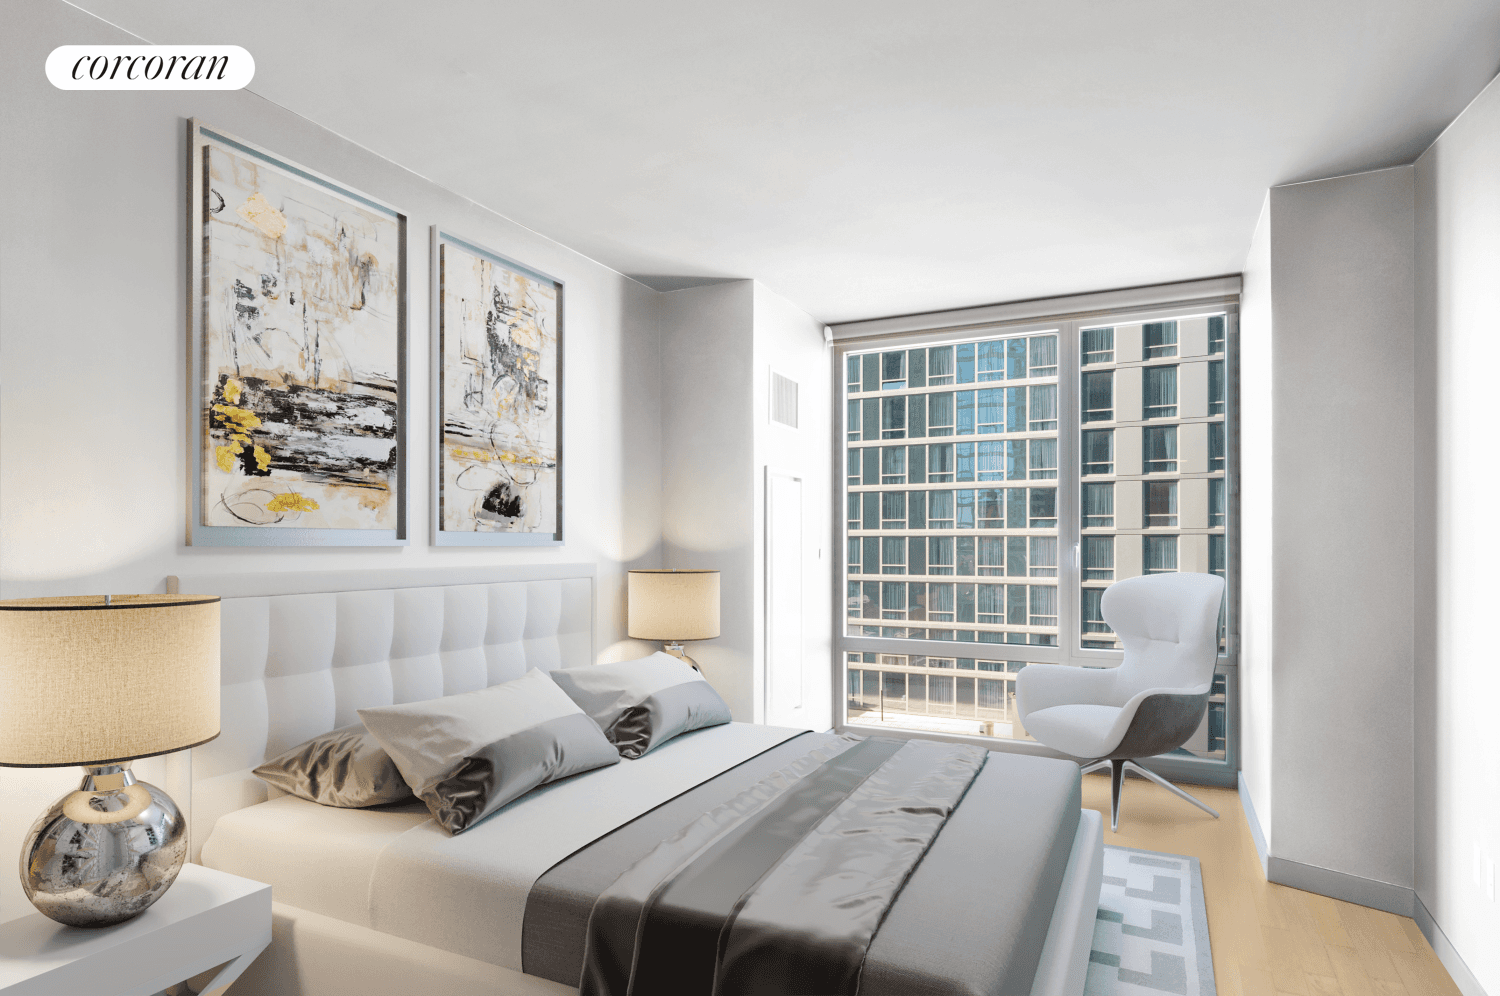 Residence 1201 blends modern comfort with iconic NYC and partial river views.